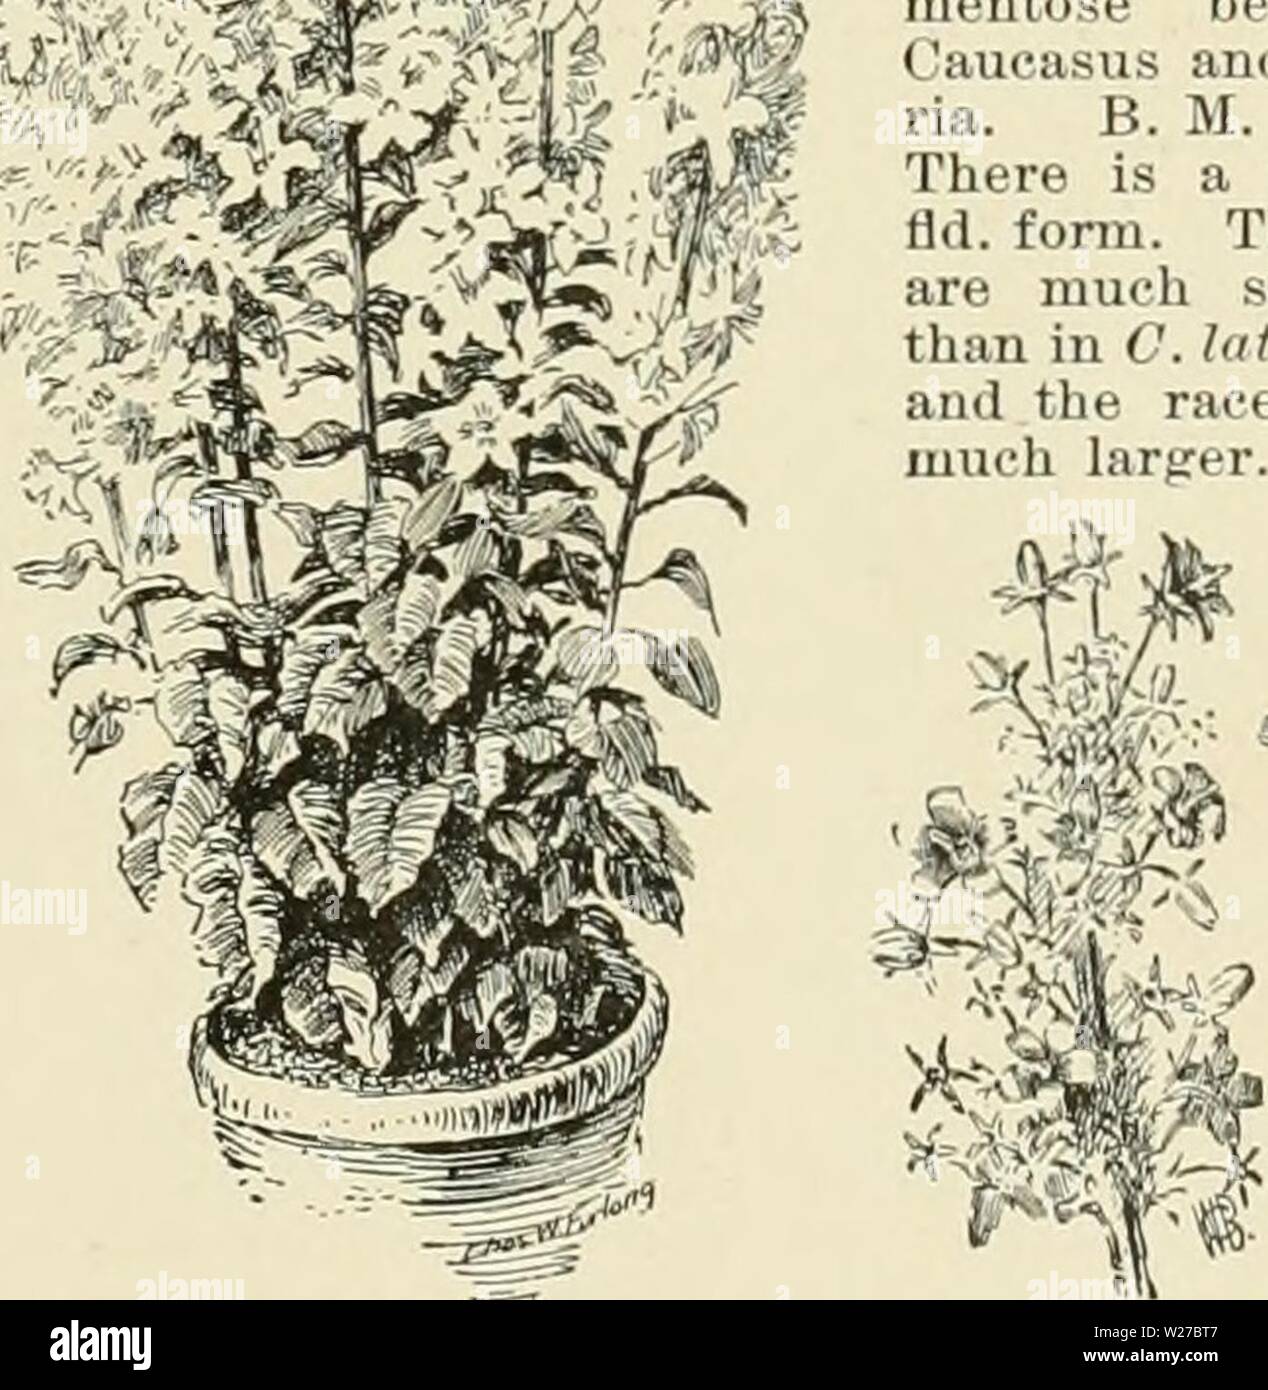 Archive image from page 262 of Cyclopedia of American horticulture, comprising. Cyclopedia of American horticulture, comprising suggestions for cultivation of horticultural plants, descriptions of the species of fruits, vegetables, flowers, and ornamental plants sold in the United States and Canada, together with geographical and biographical sketches  cyclopediaofam01bail Year: 1900  late, ovate-oblong, subcordate ; stem-lvs. sessile, ovate- lanceolate : calyx lobes acuminate, spreading, half as long as the broadly bell-shaped corolla : fls. numerous, in pyramidal racemes. Austria, near Adria Stock Photo